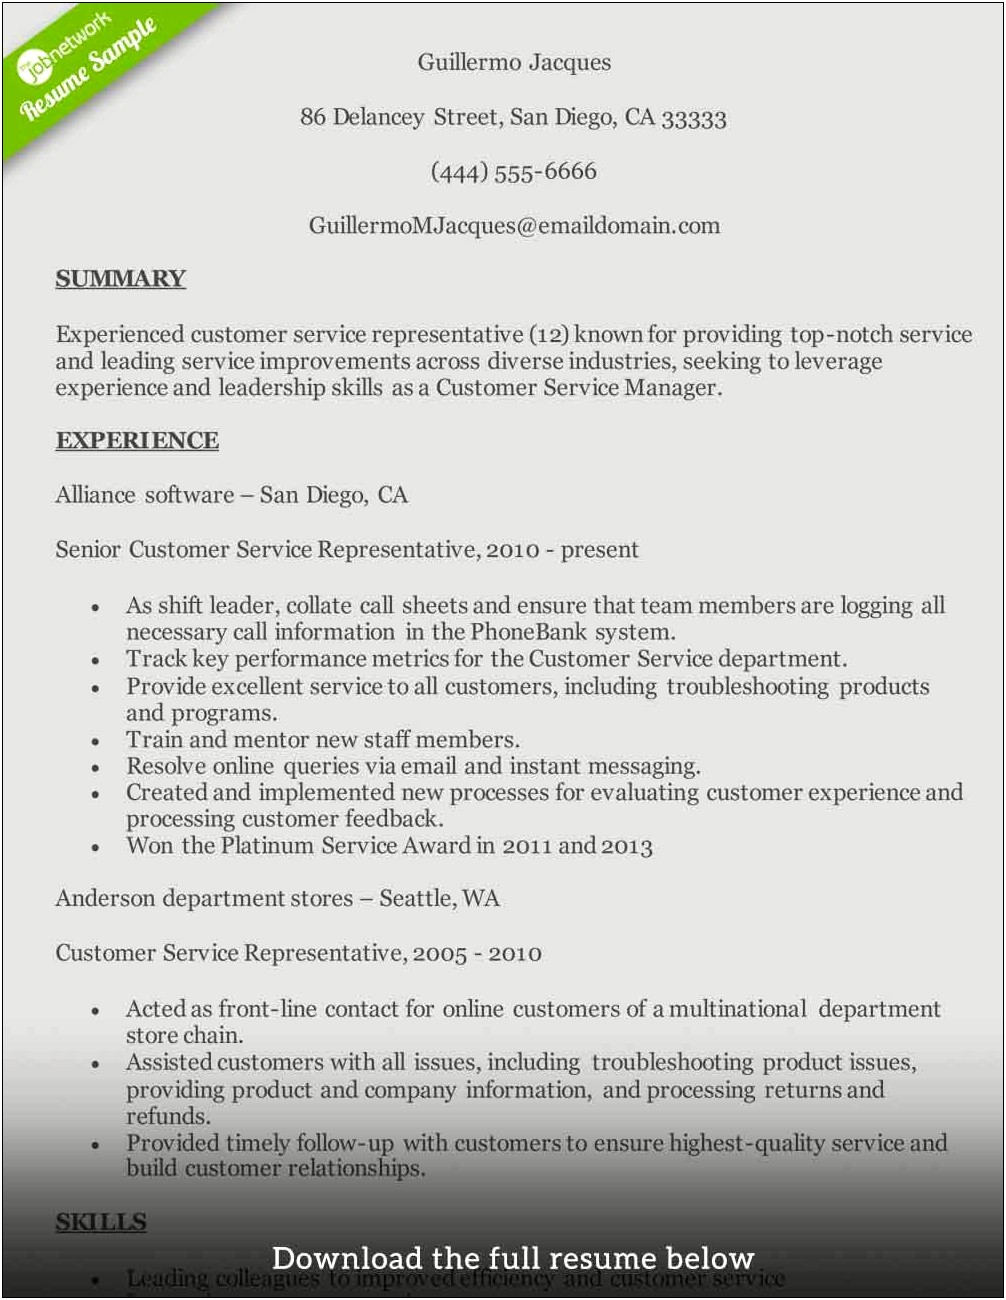 Resume For Someone With Customer Service Experience